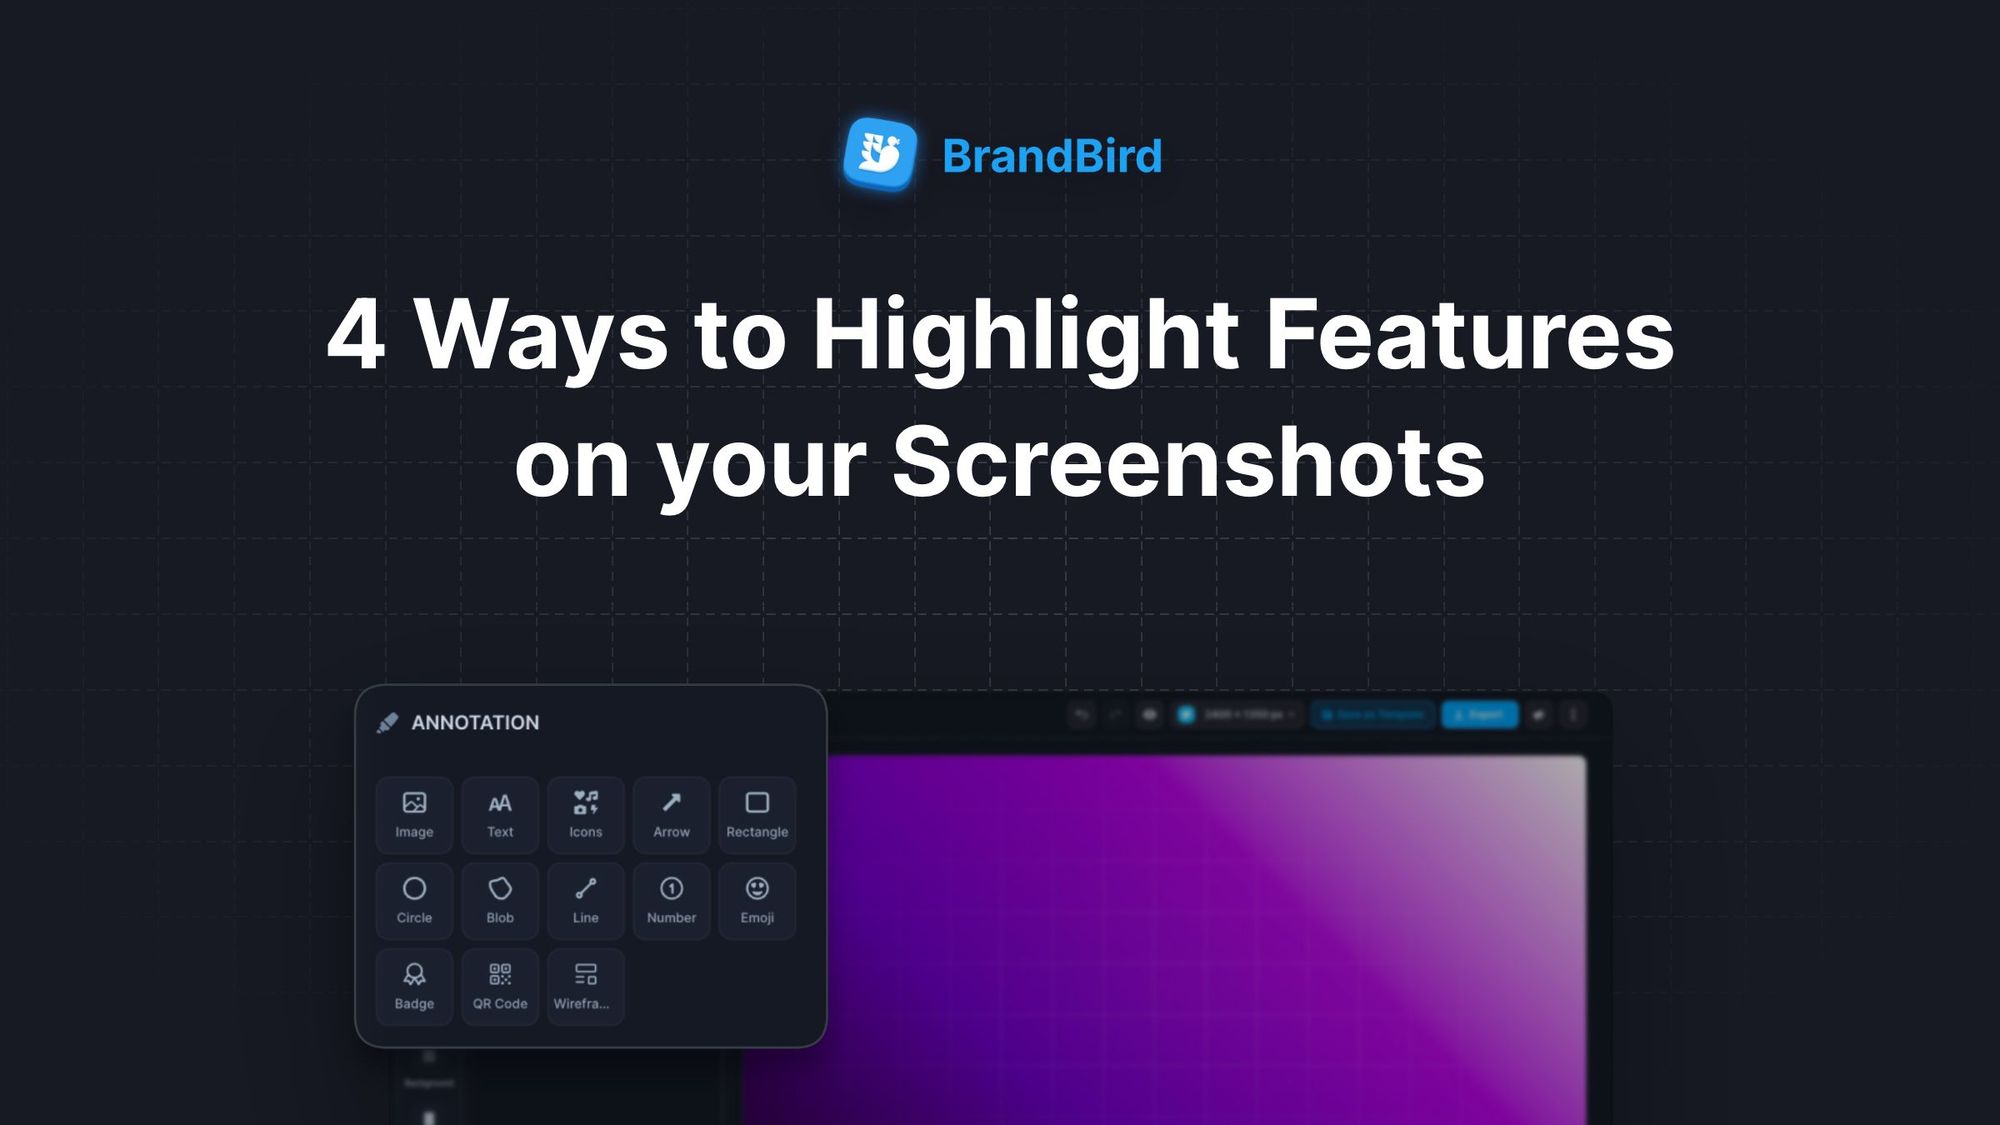 4 Ways to Highlight your Features on Screenshots